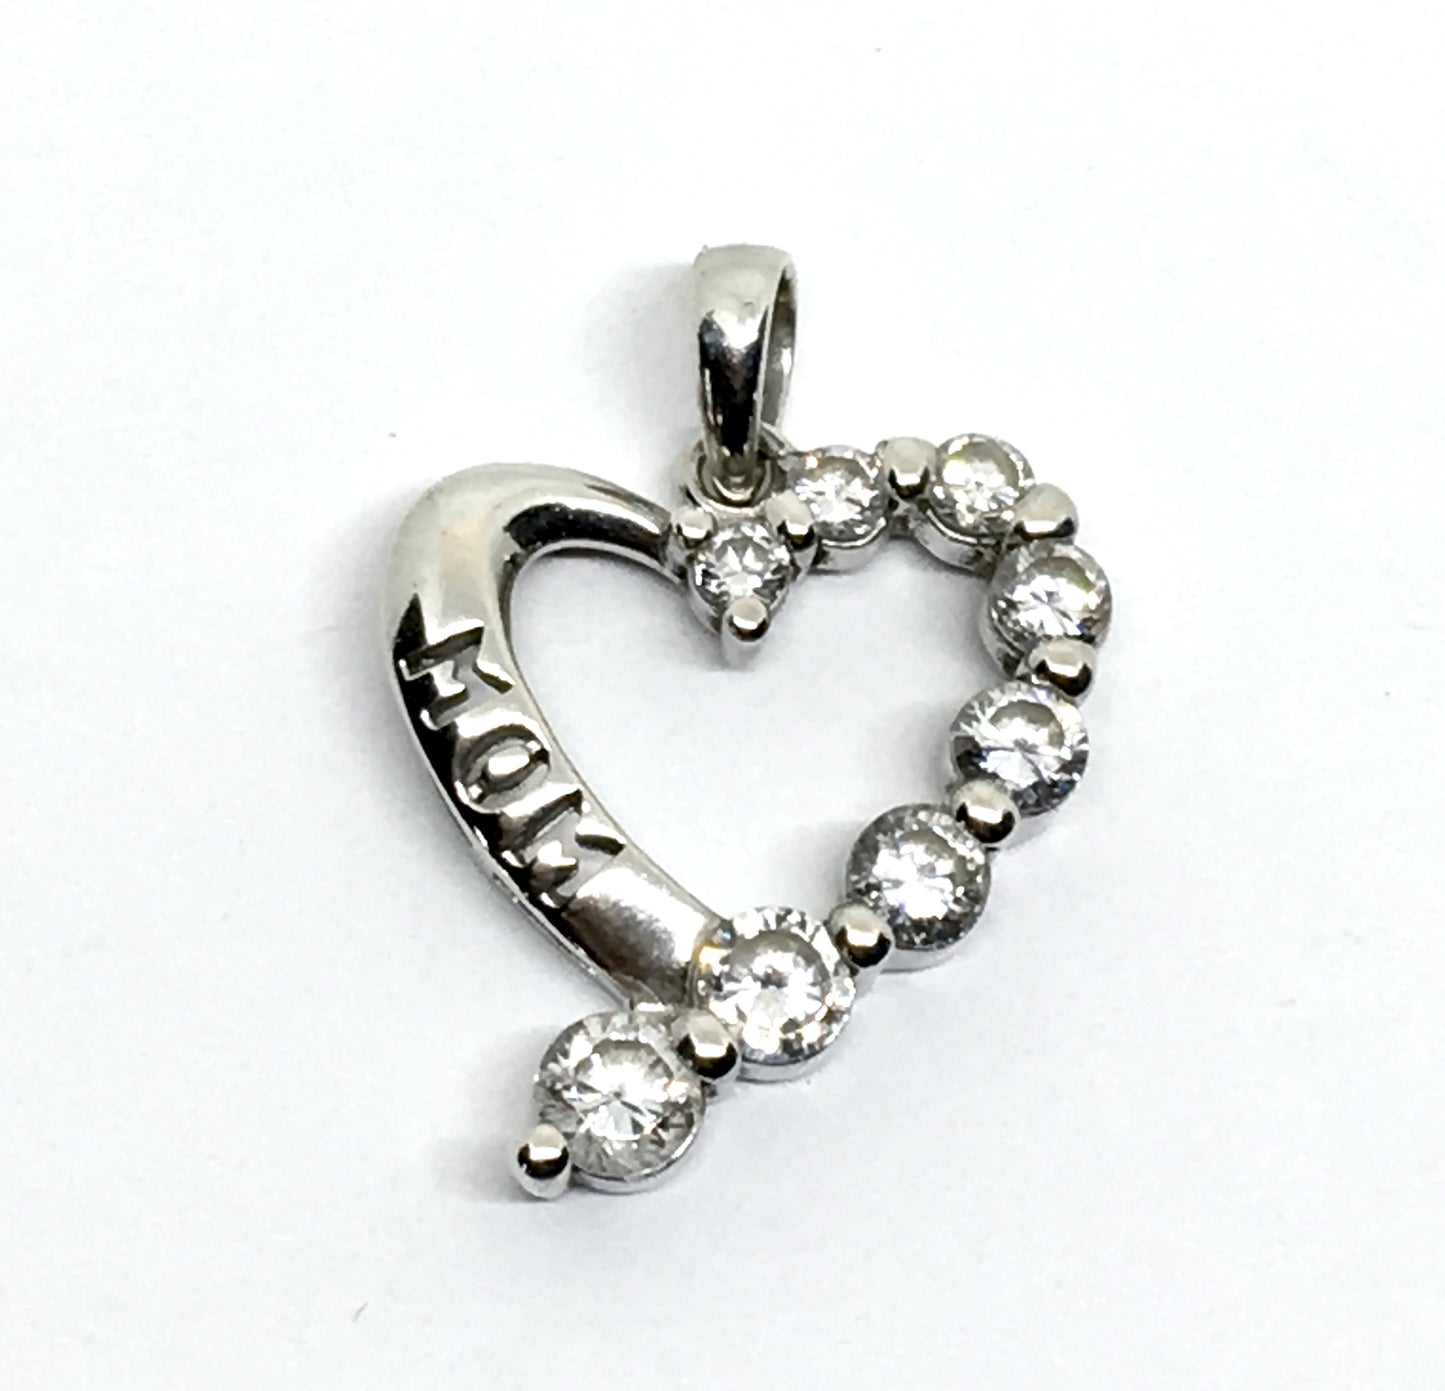 Estate Jewelry online - Sterling Silver "MoM' Cutout Style Heart Statement Pendant - at www.Blingschligners.com USA